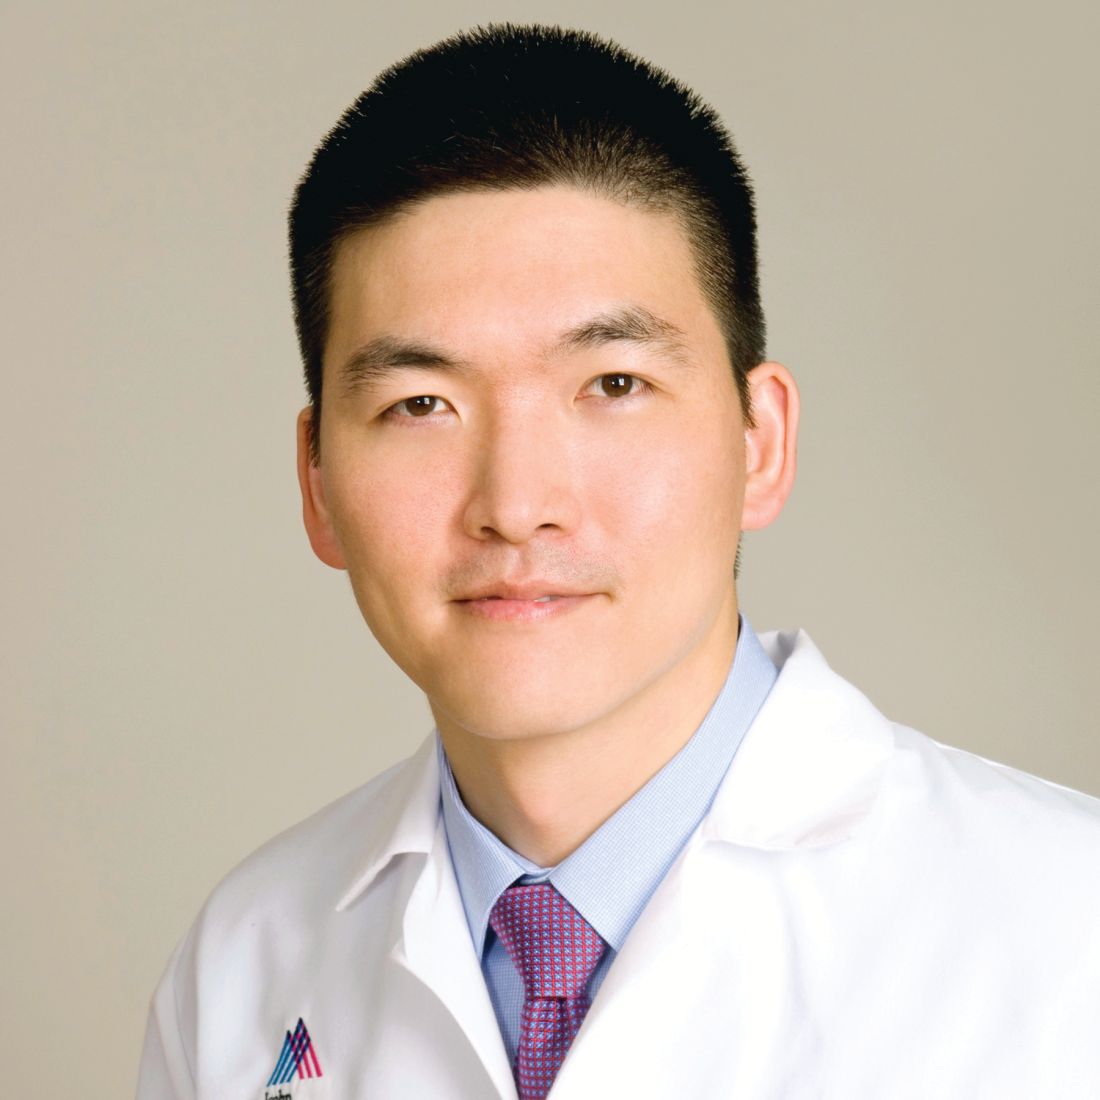 Focused on value-based care: Harry Cho, MD - The Hospitalist